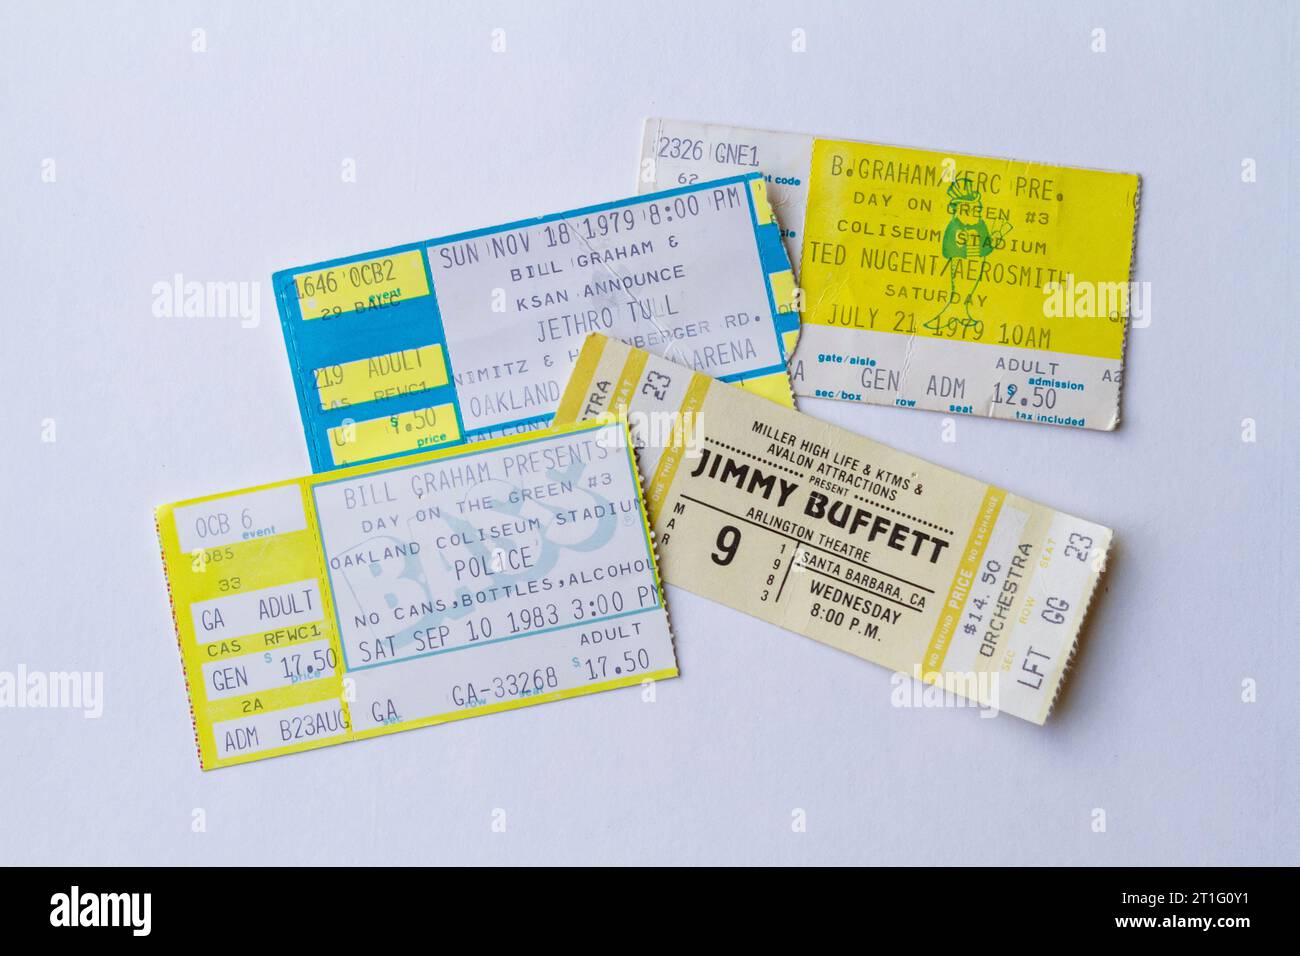 Several concert ticket stubs from popular bands in the late 1970s to early 1980s, which could be used to highlight how much prices have increased. Stock Photo